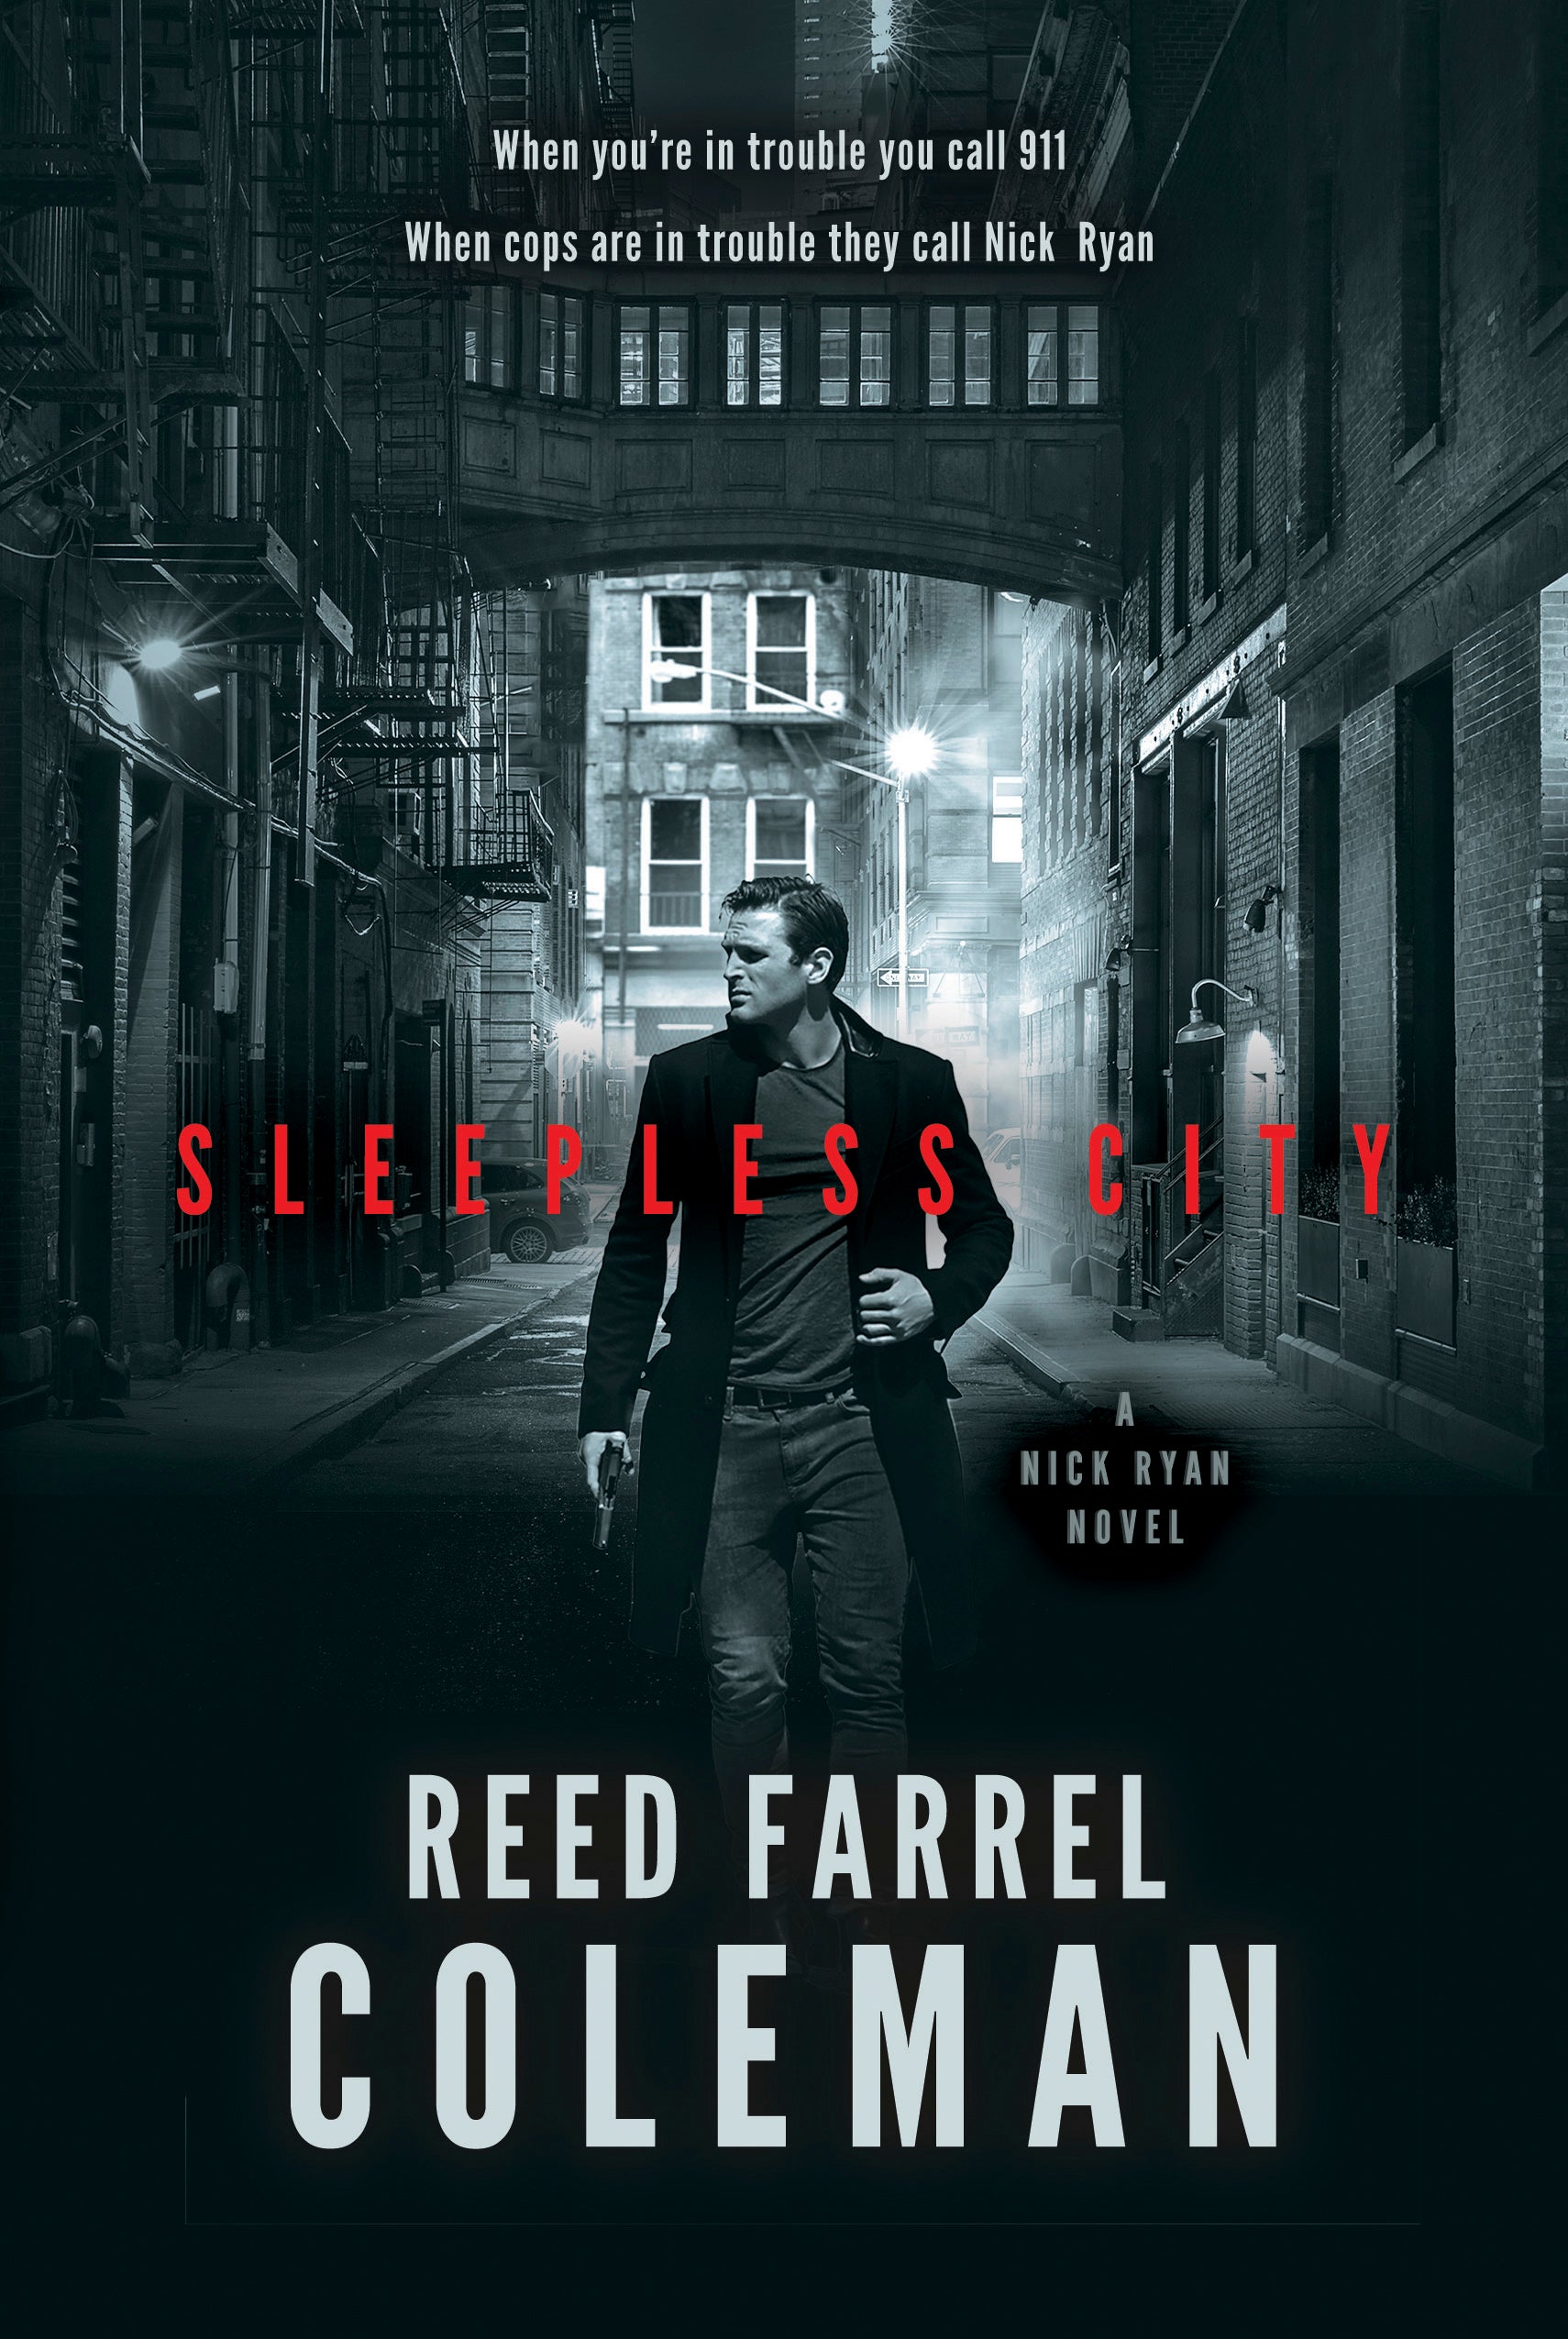 Book Review - Sleepless City